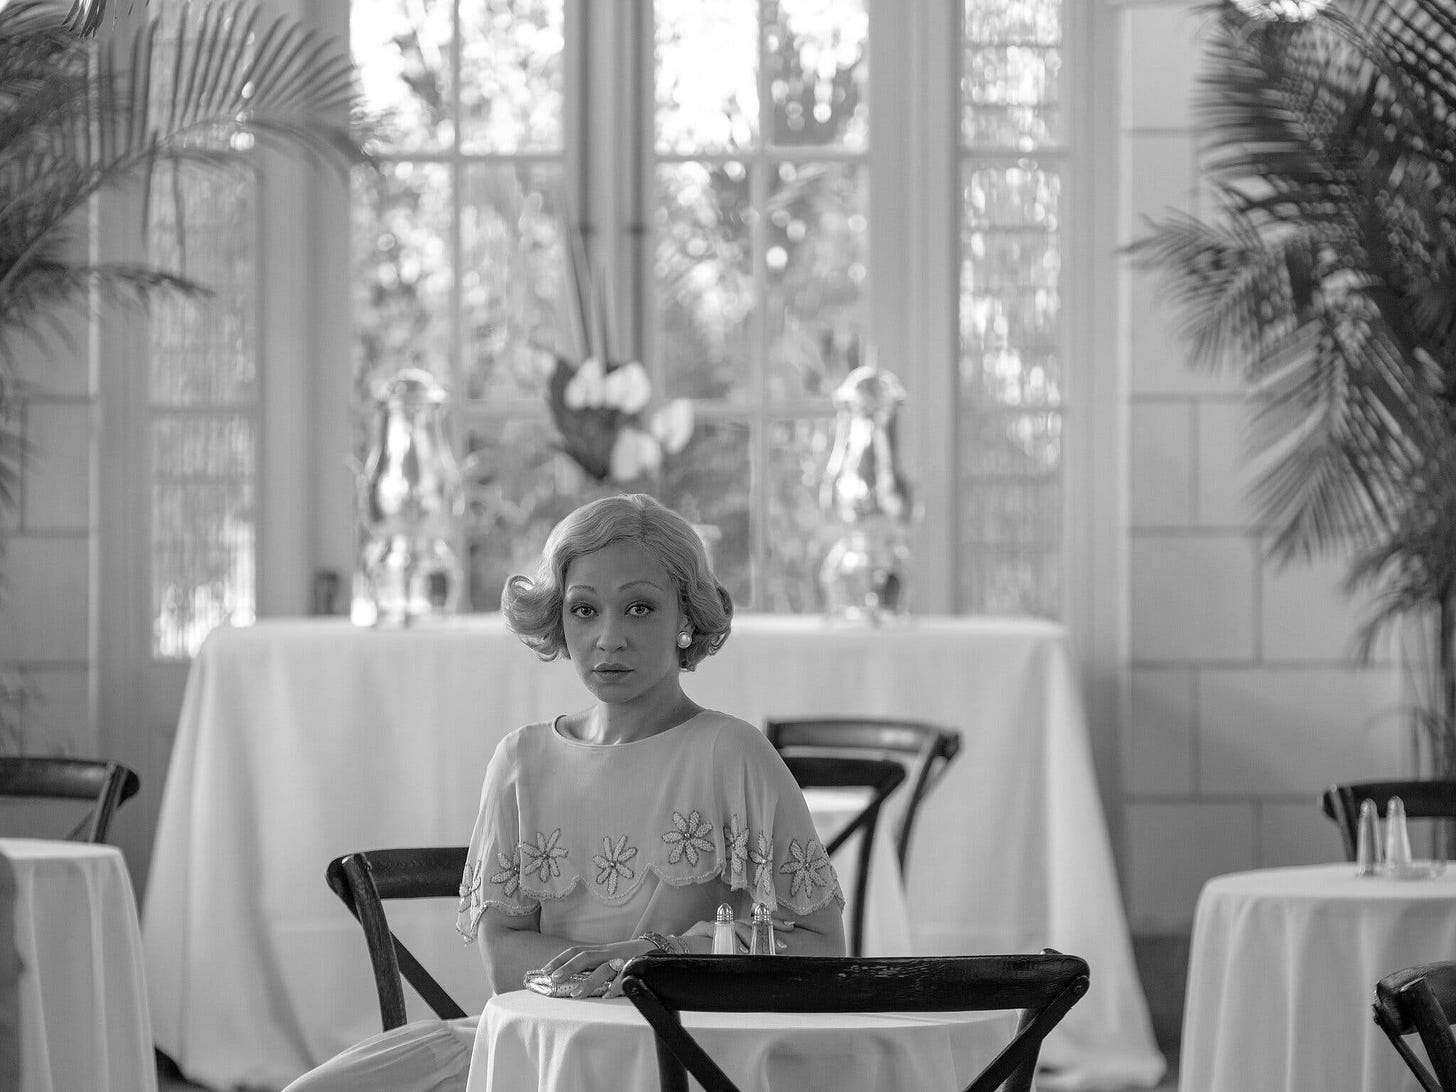 Black & White photo of Ruth Negga with blonde hair and a white dress in a tea room with white curtains and table cloths.